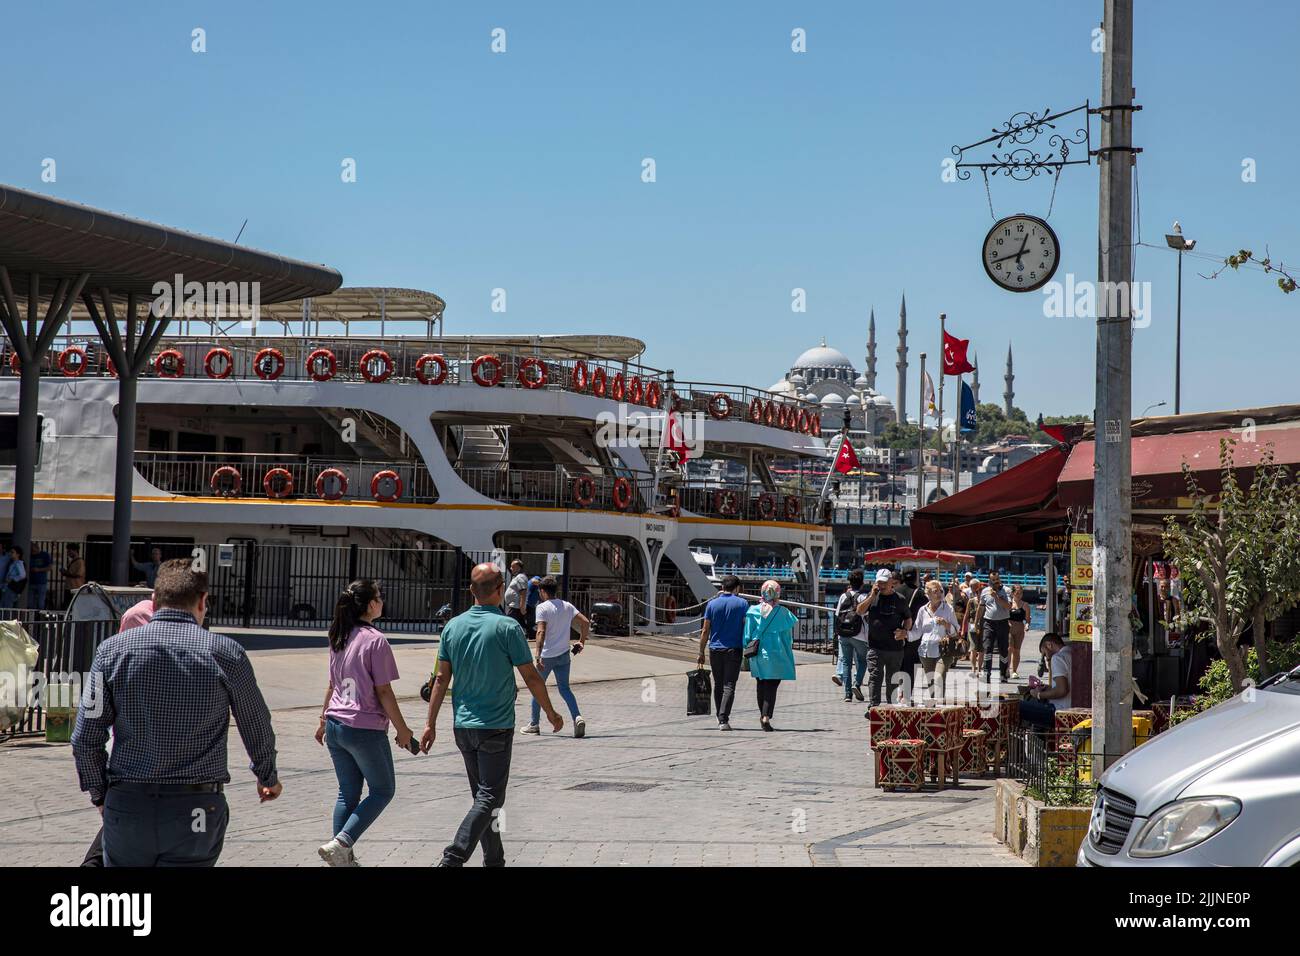 The crowd of people at Karakoy dock and its surroundings is less compared to other days due to the high temperatures. Stock Photo